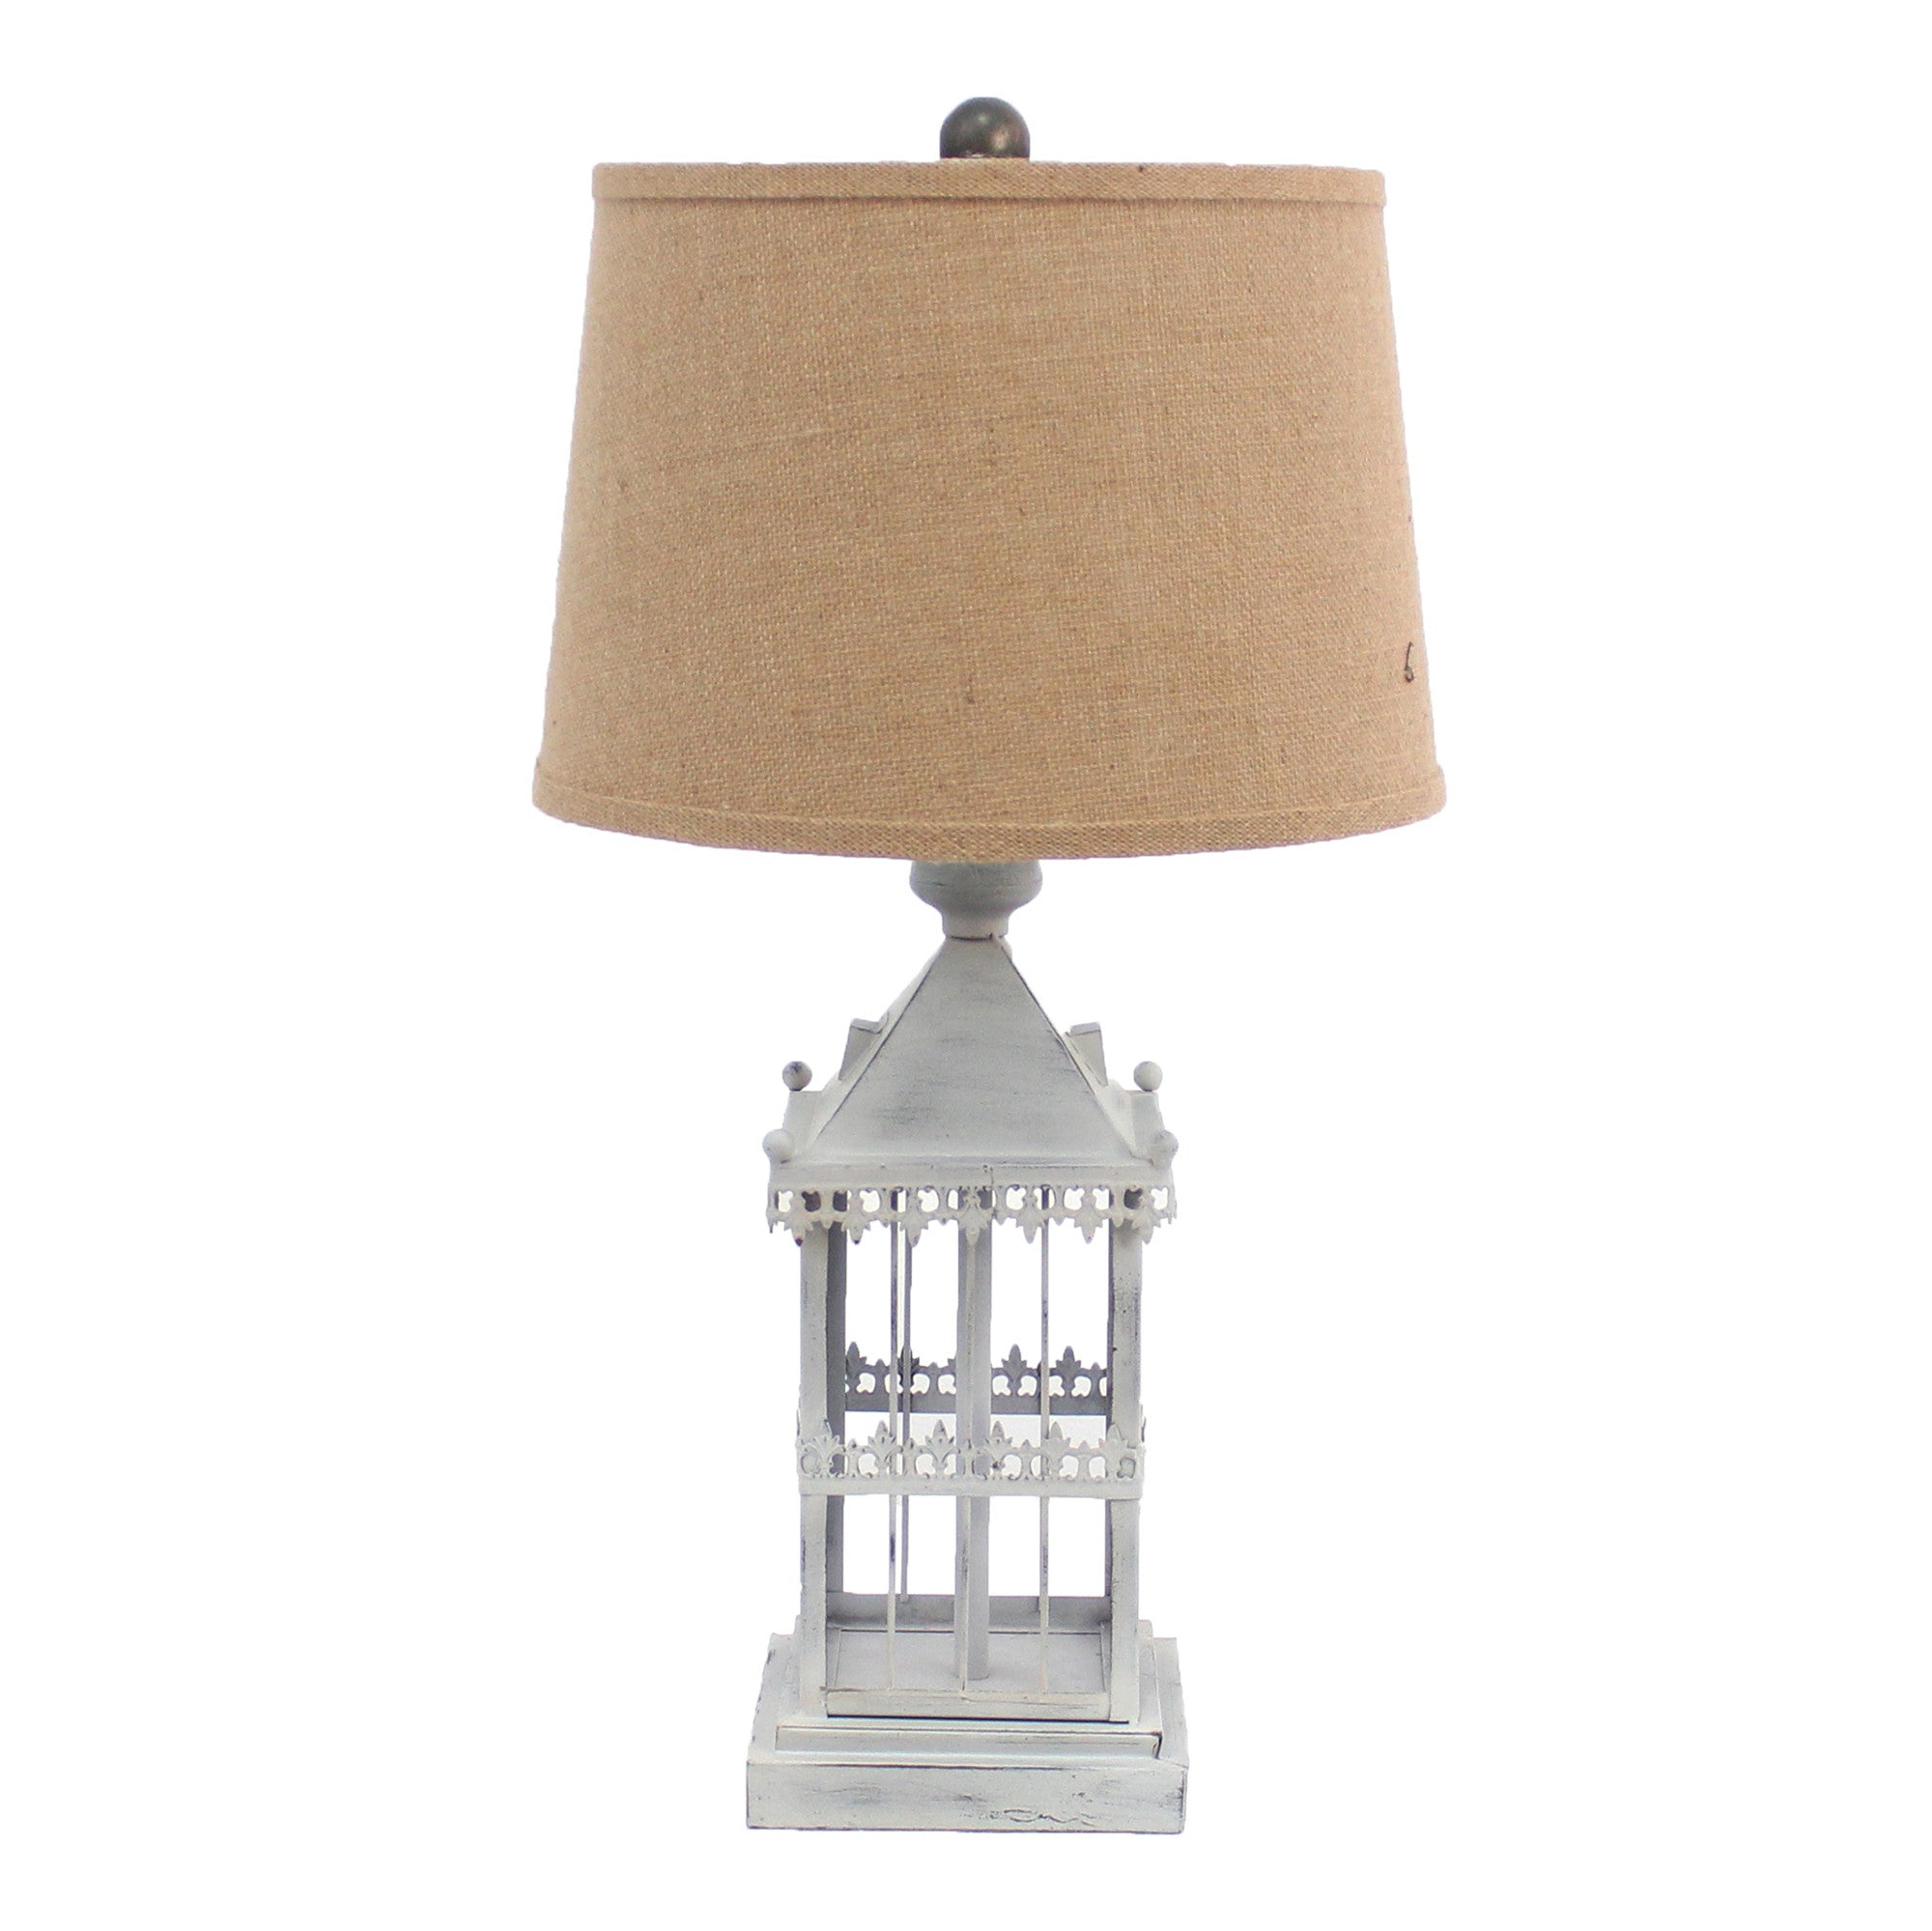 26" Gray Metal Table Lamp With Brown Drum Shade